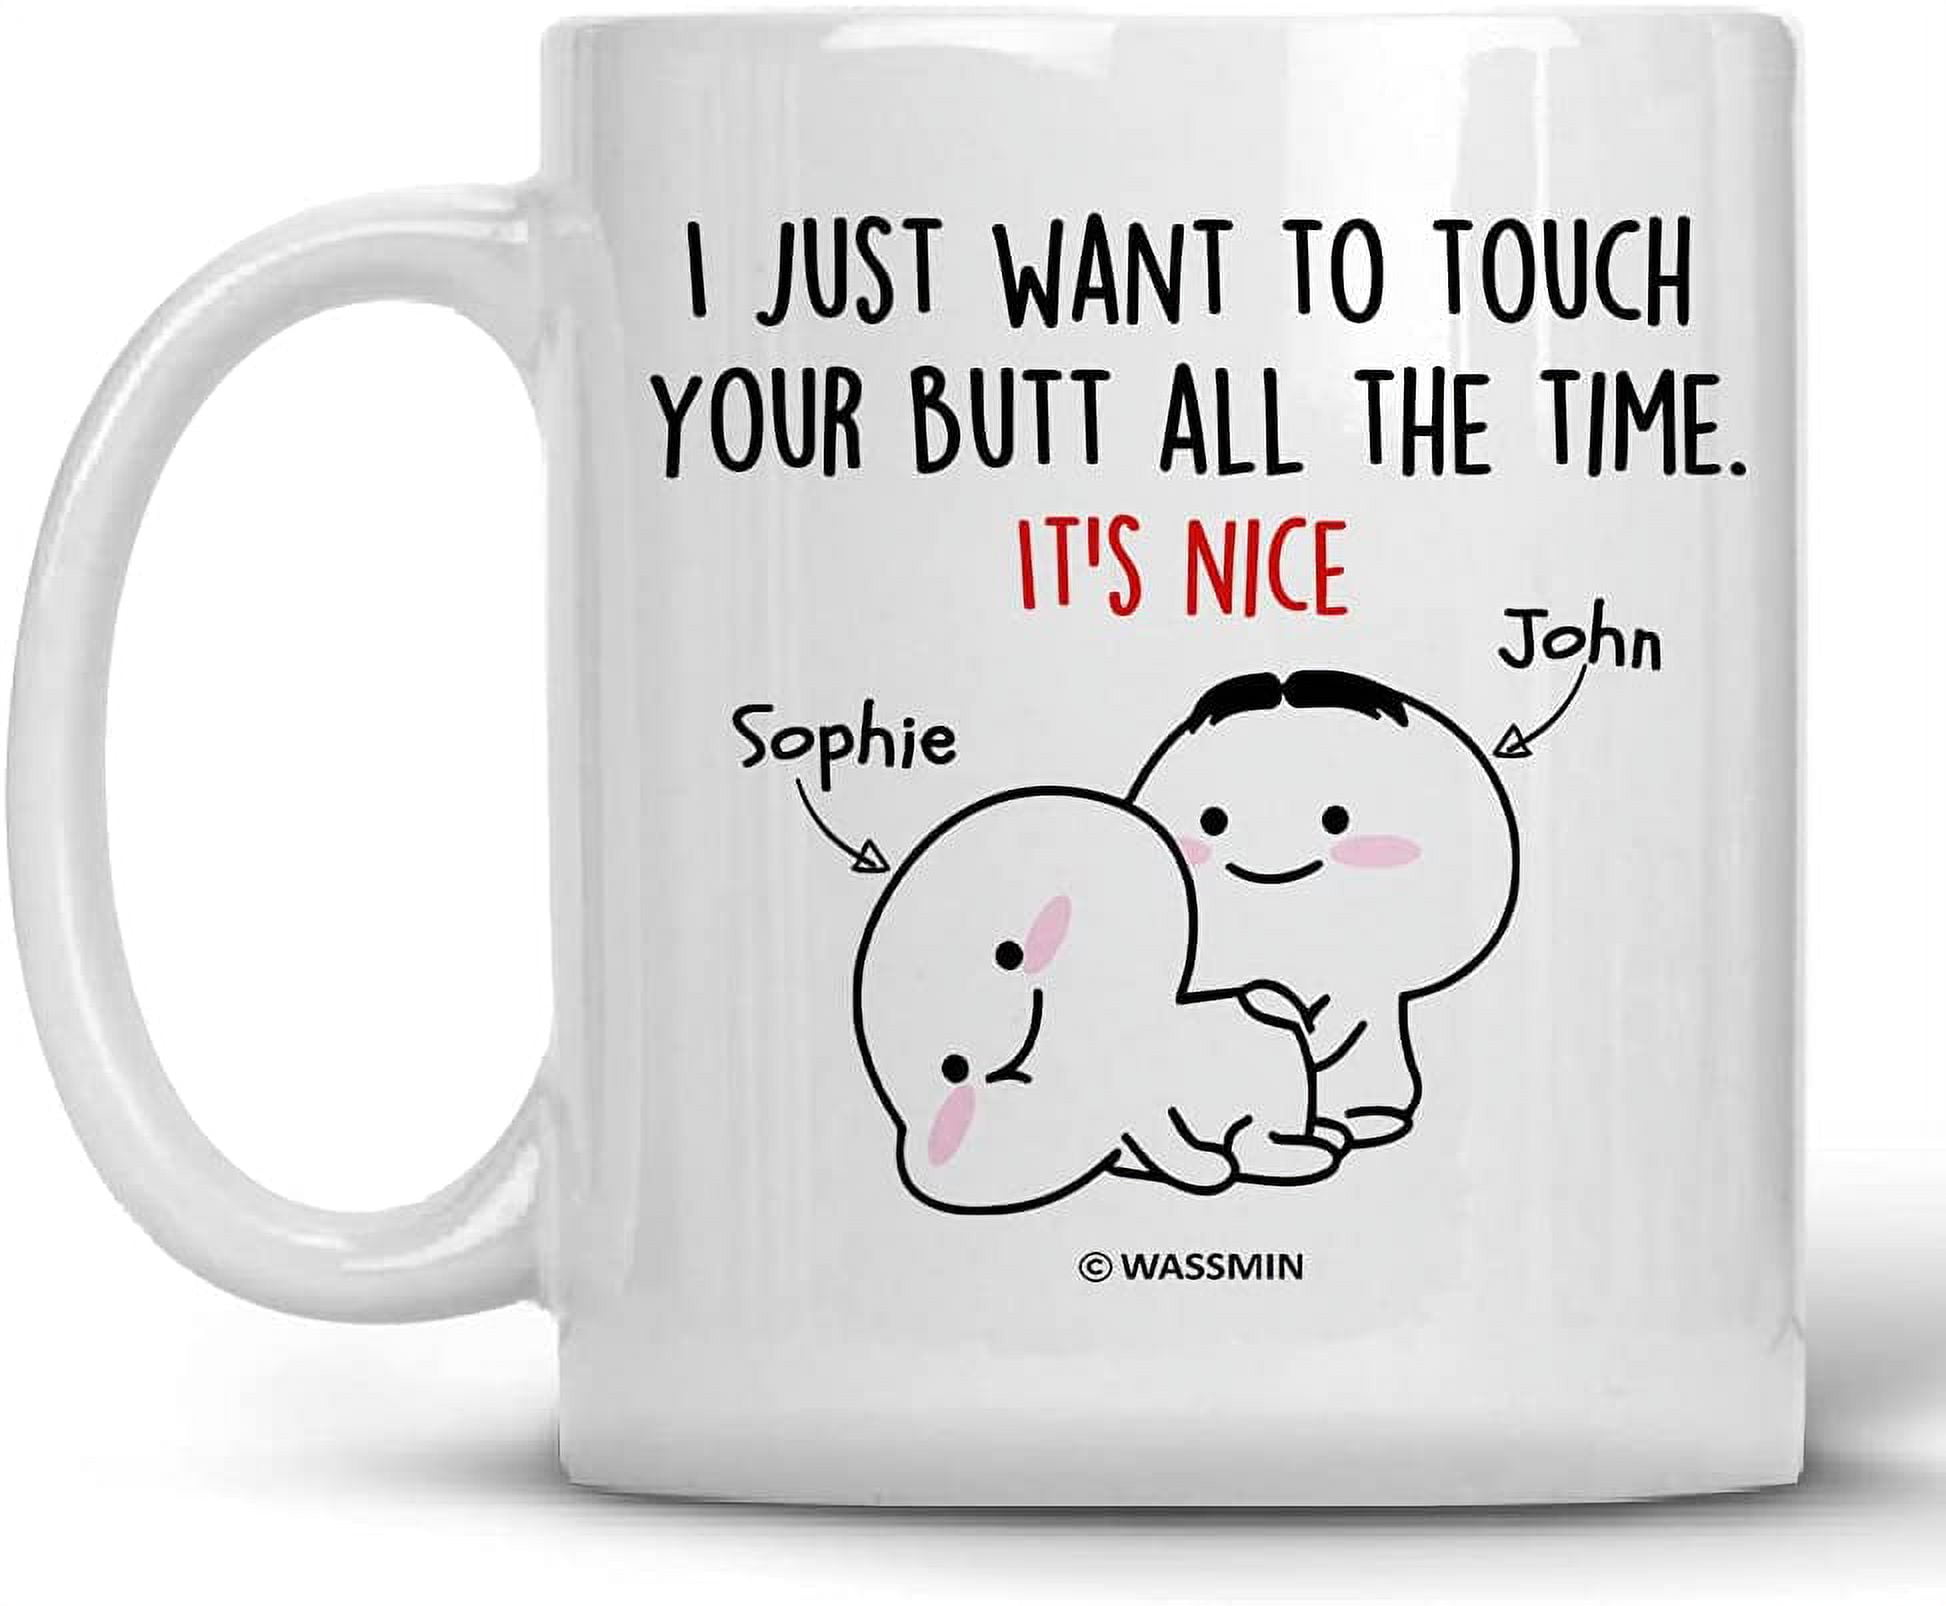  Personalized I Just Want To Touch Your Boobs All The Time Mug,  Funny Couple Boy To Girl For Lover Partner Friend Boyfriend Girlfriend  Customized name 11-15 Oz Ceramic Coffee Mug 